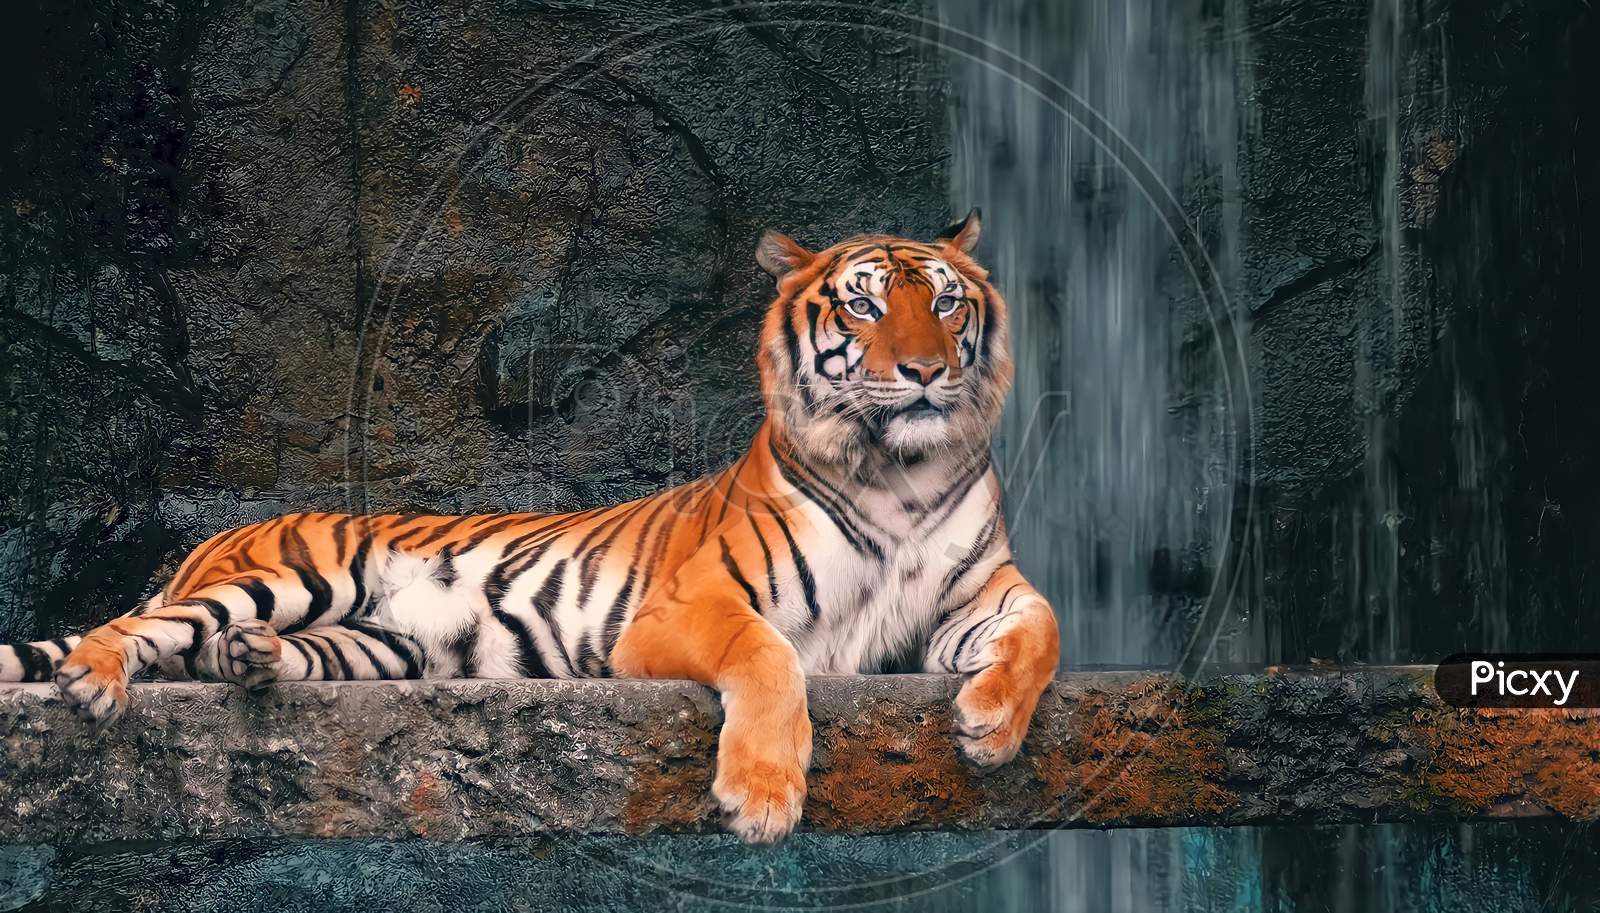 The Tiger Lies on the Rock Near the Waterfall at Thailand